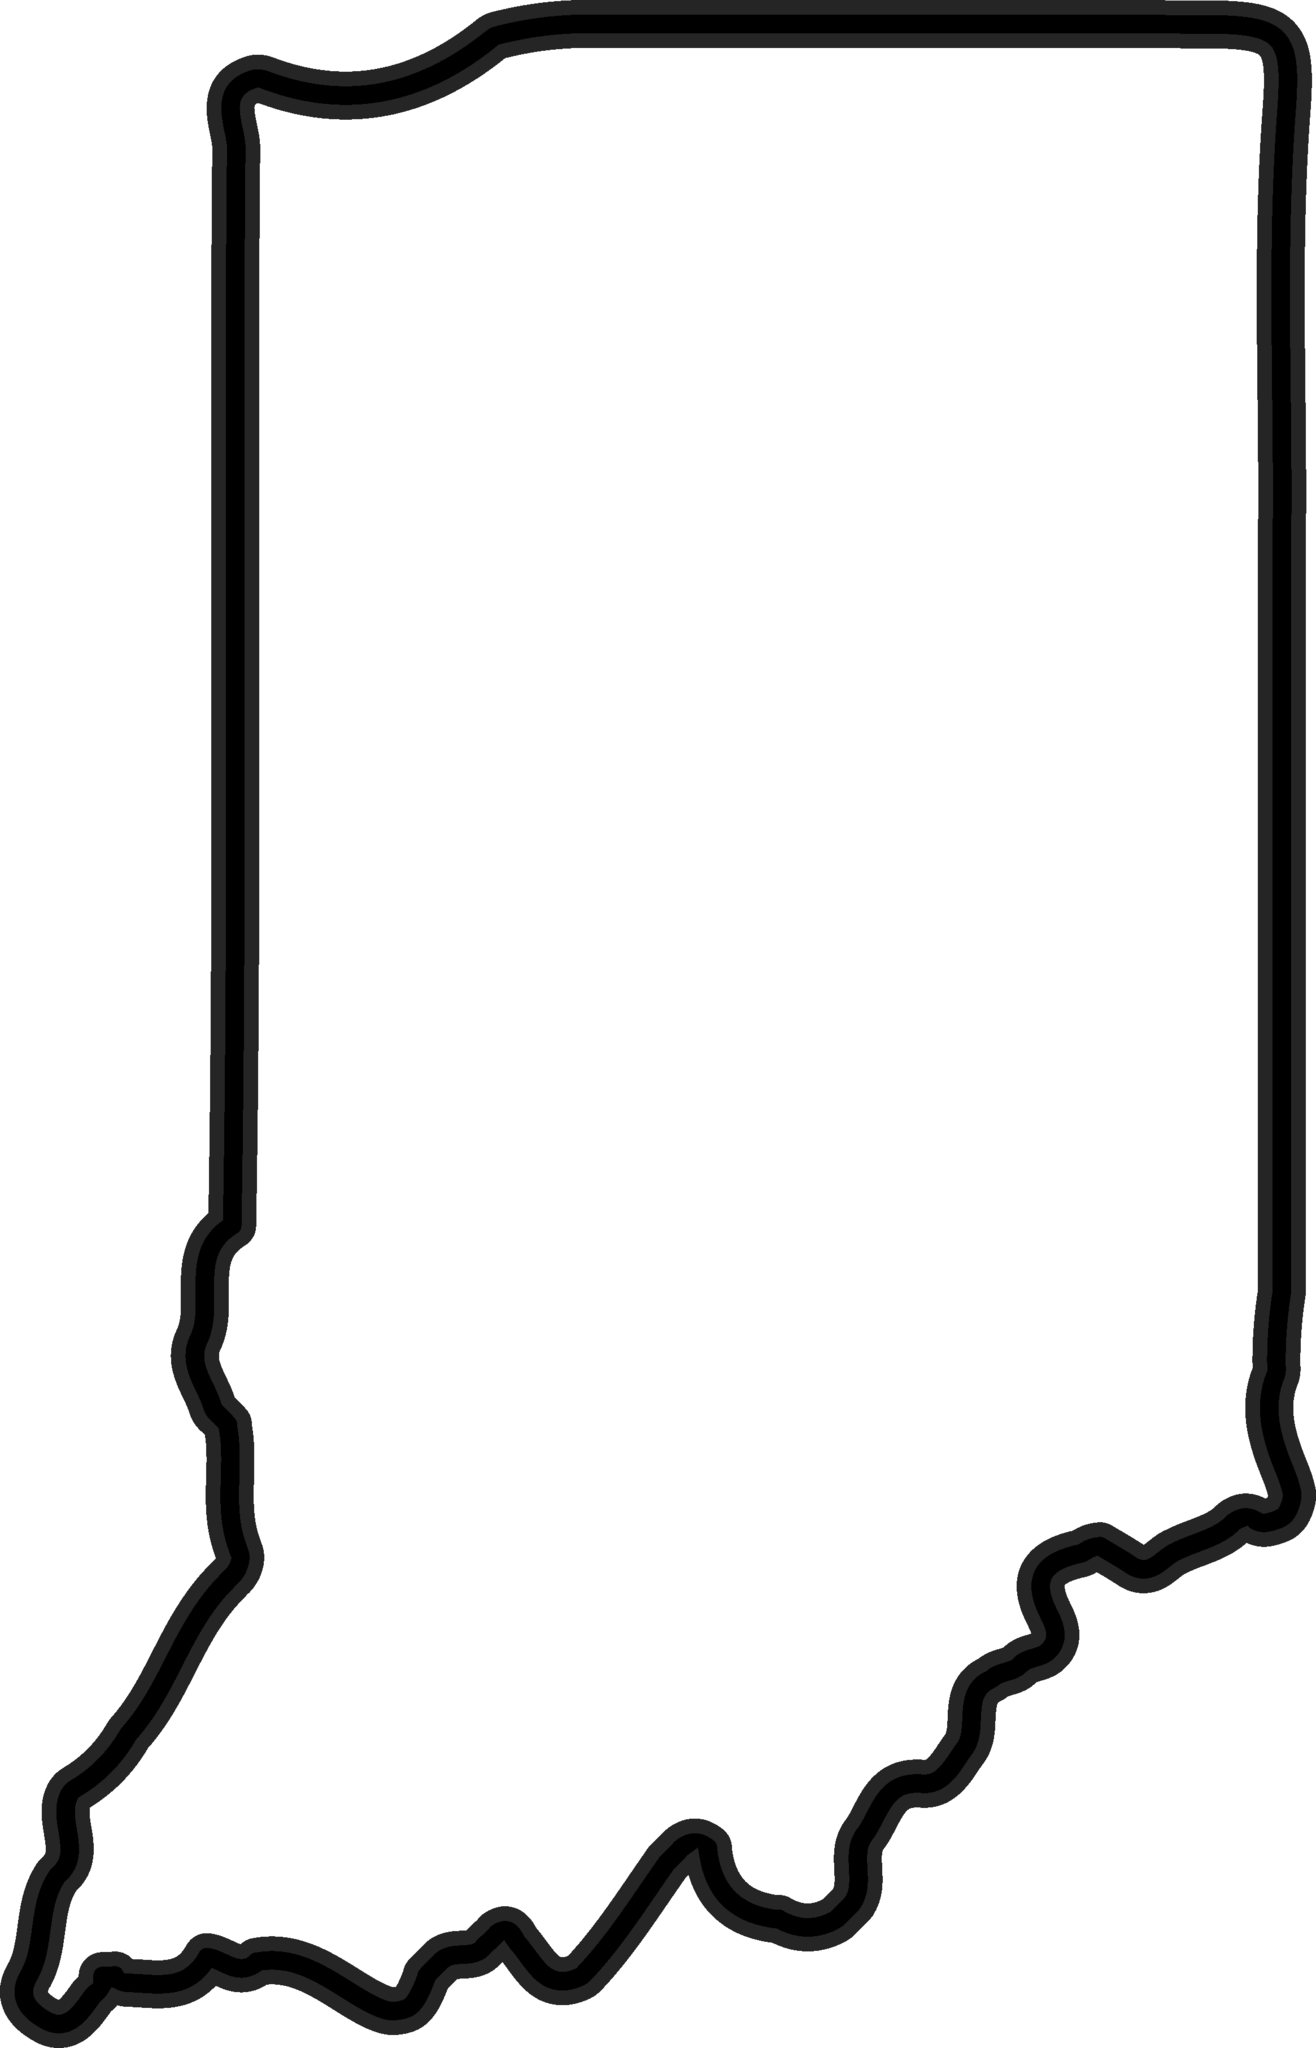 Indiana Clipart